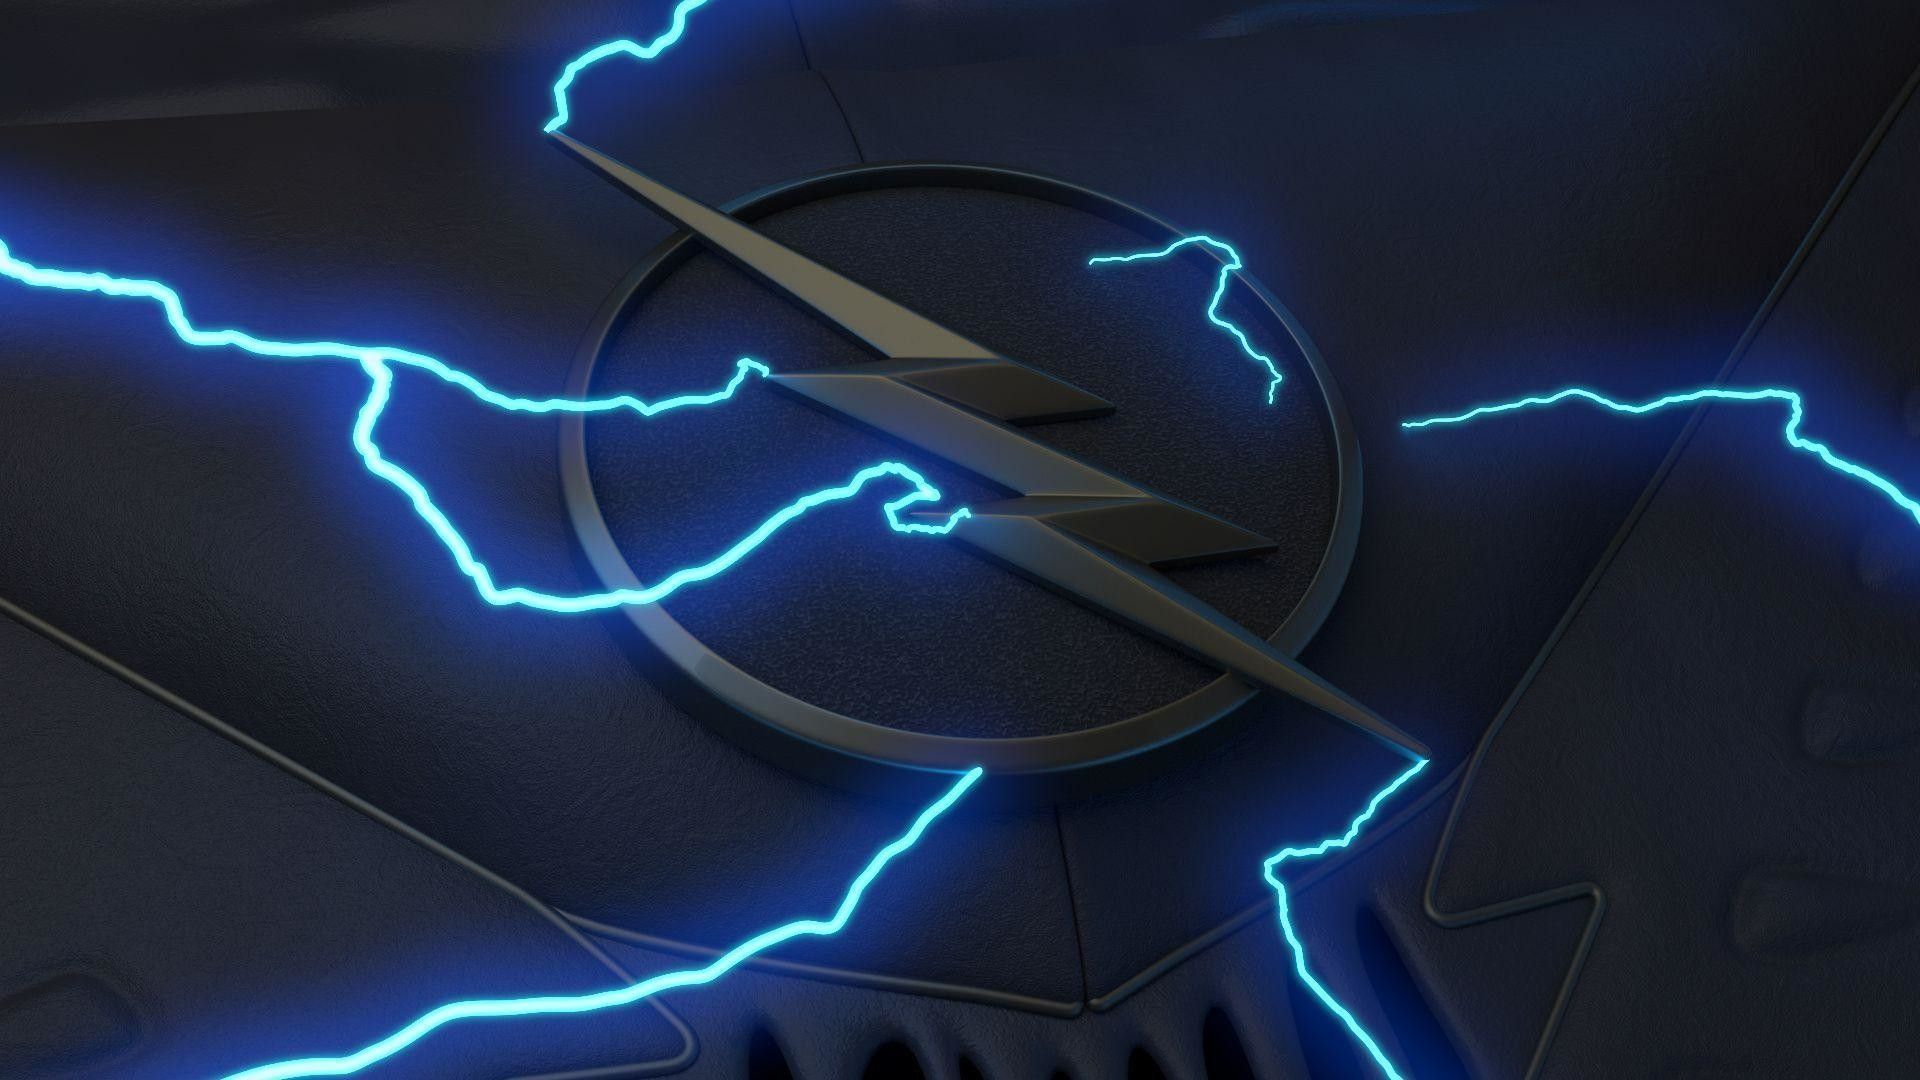 Zoom The Flash Wallpaper background picture